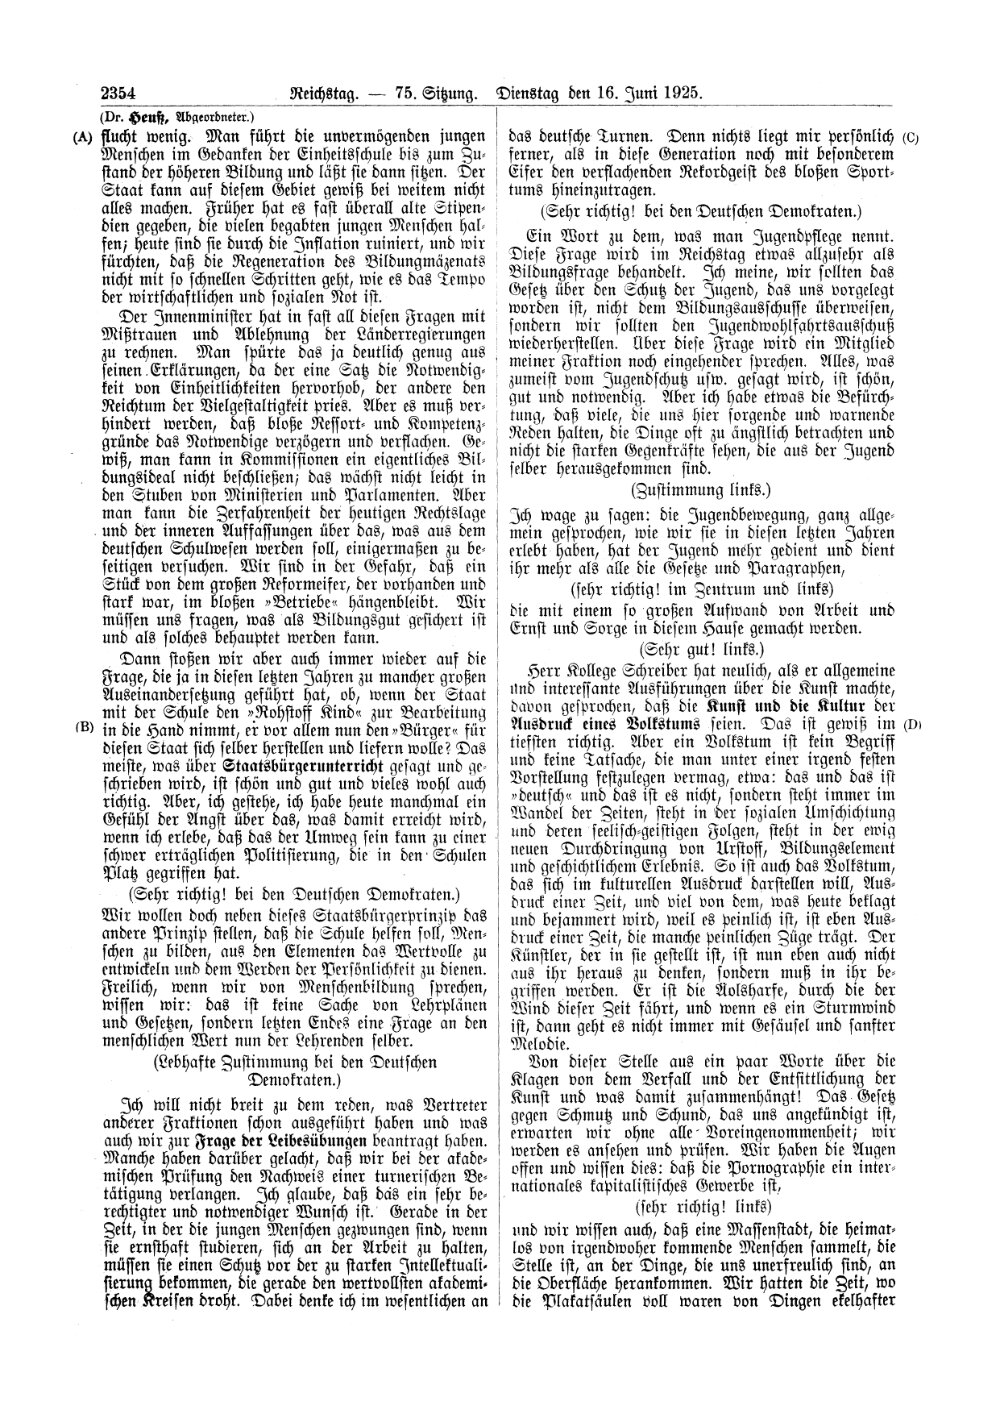 Scan of page 2354